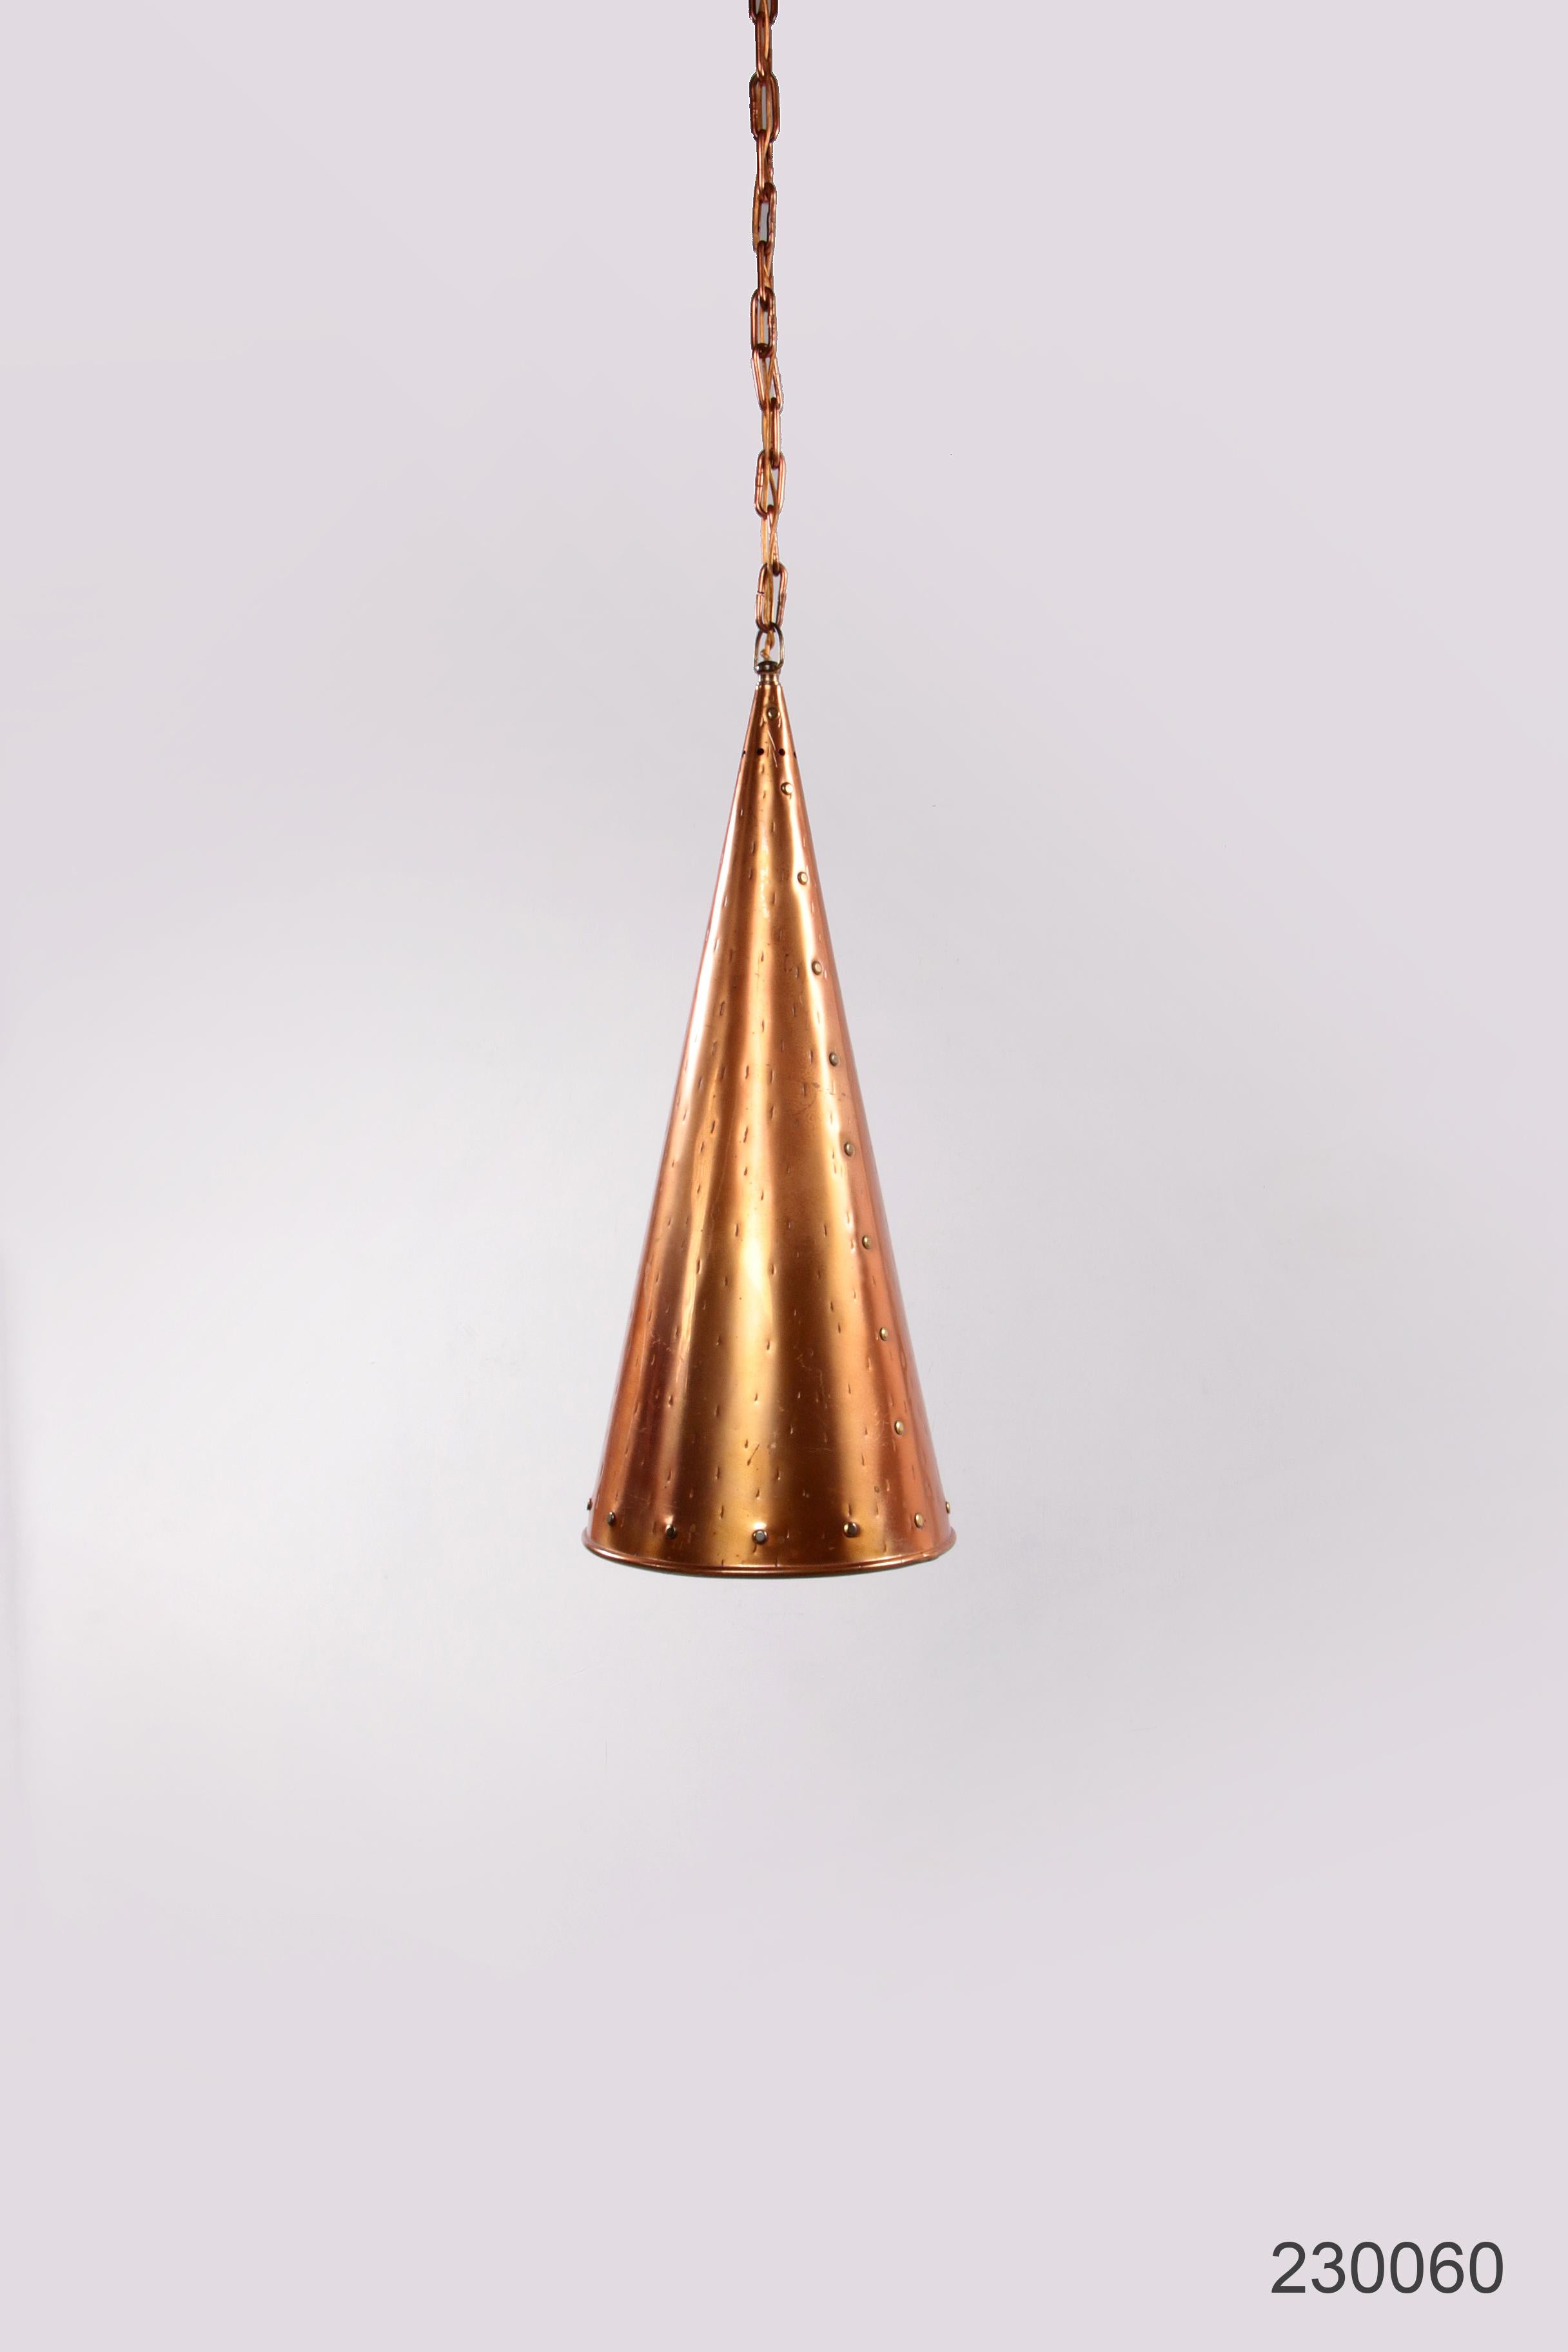 Danish hand-hammered copper hanging lamp by E.S Horn Aalestrup, 1950s For Sale 5